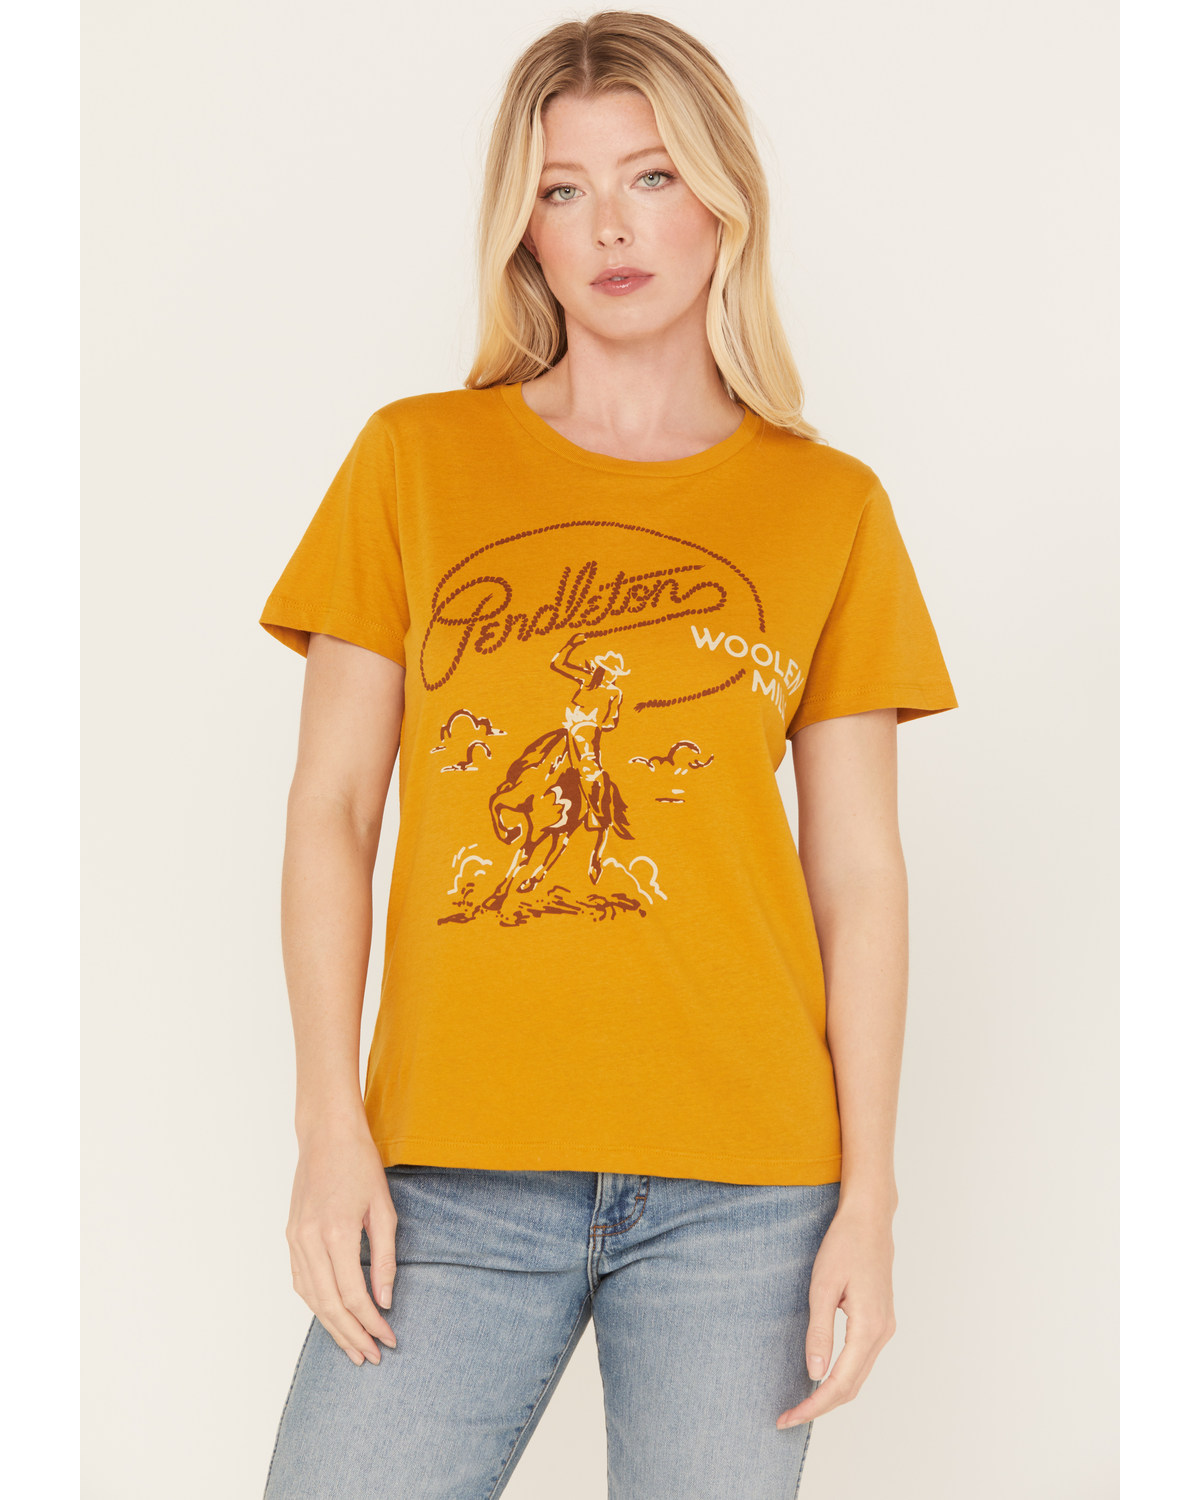 Pendleton Women's Rodeo Cowgirl Short Sleeve Graphic Tee